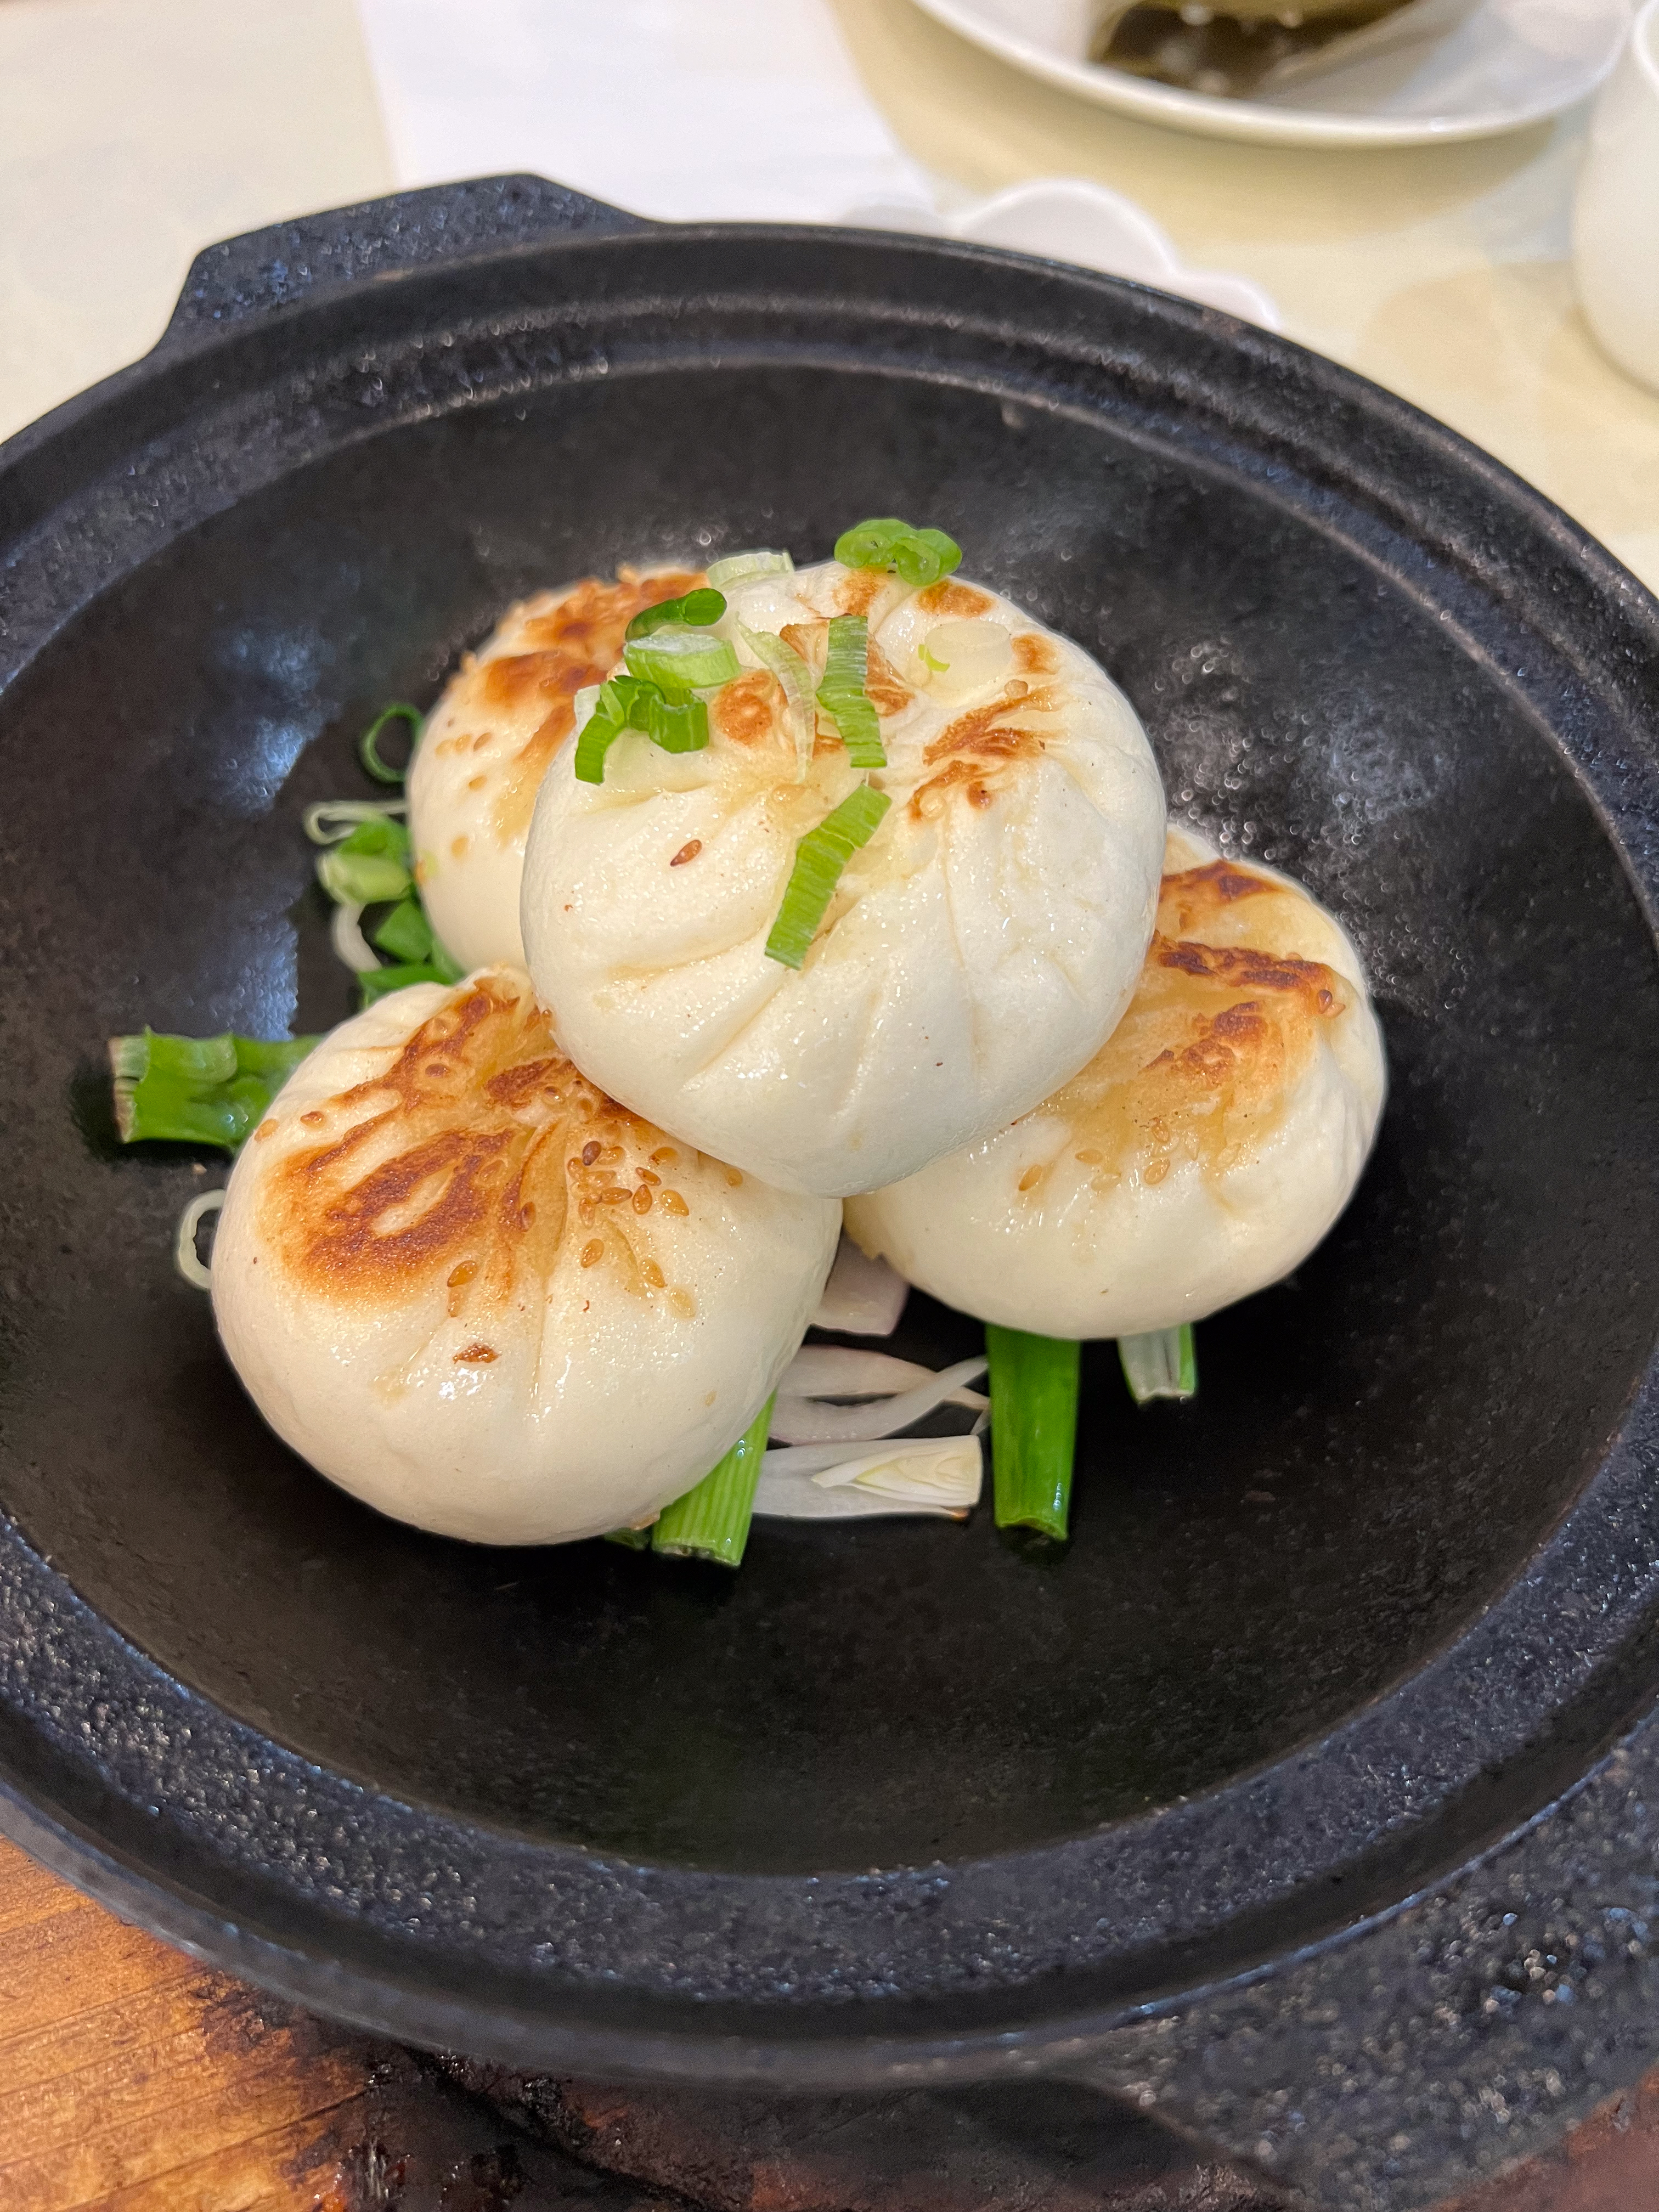 Pan fried steamed buns